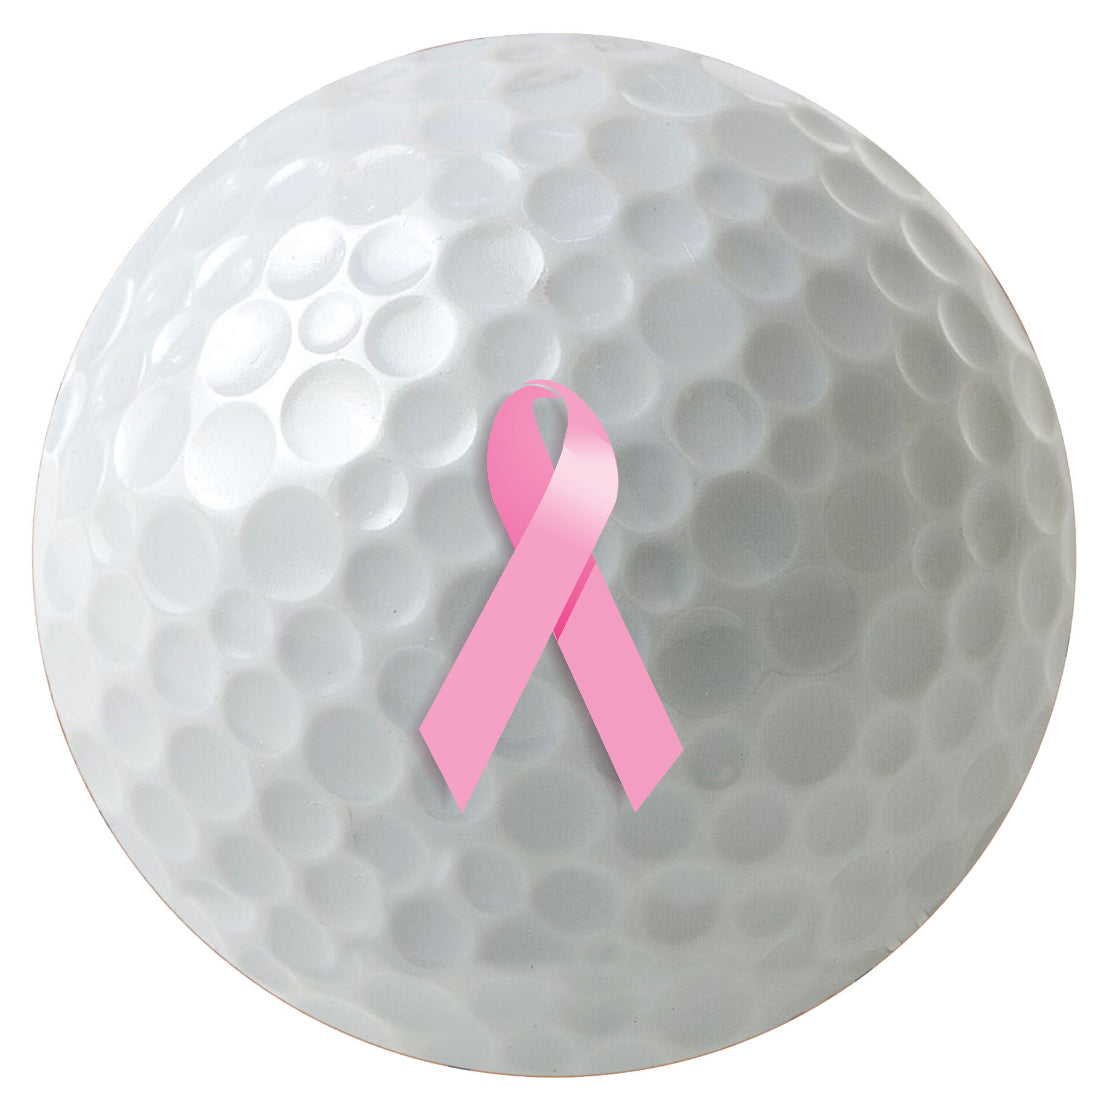 Charity Awareness Ribbon, Multiple Colors, Pick a Color, 3-Pack Printed Golf Balls, Sleeve of 3 Golf Balls